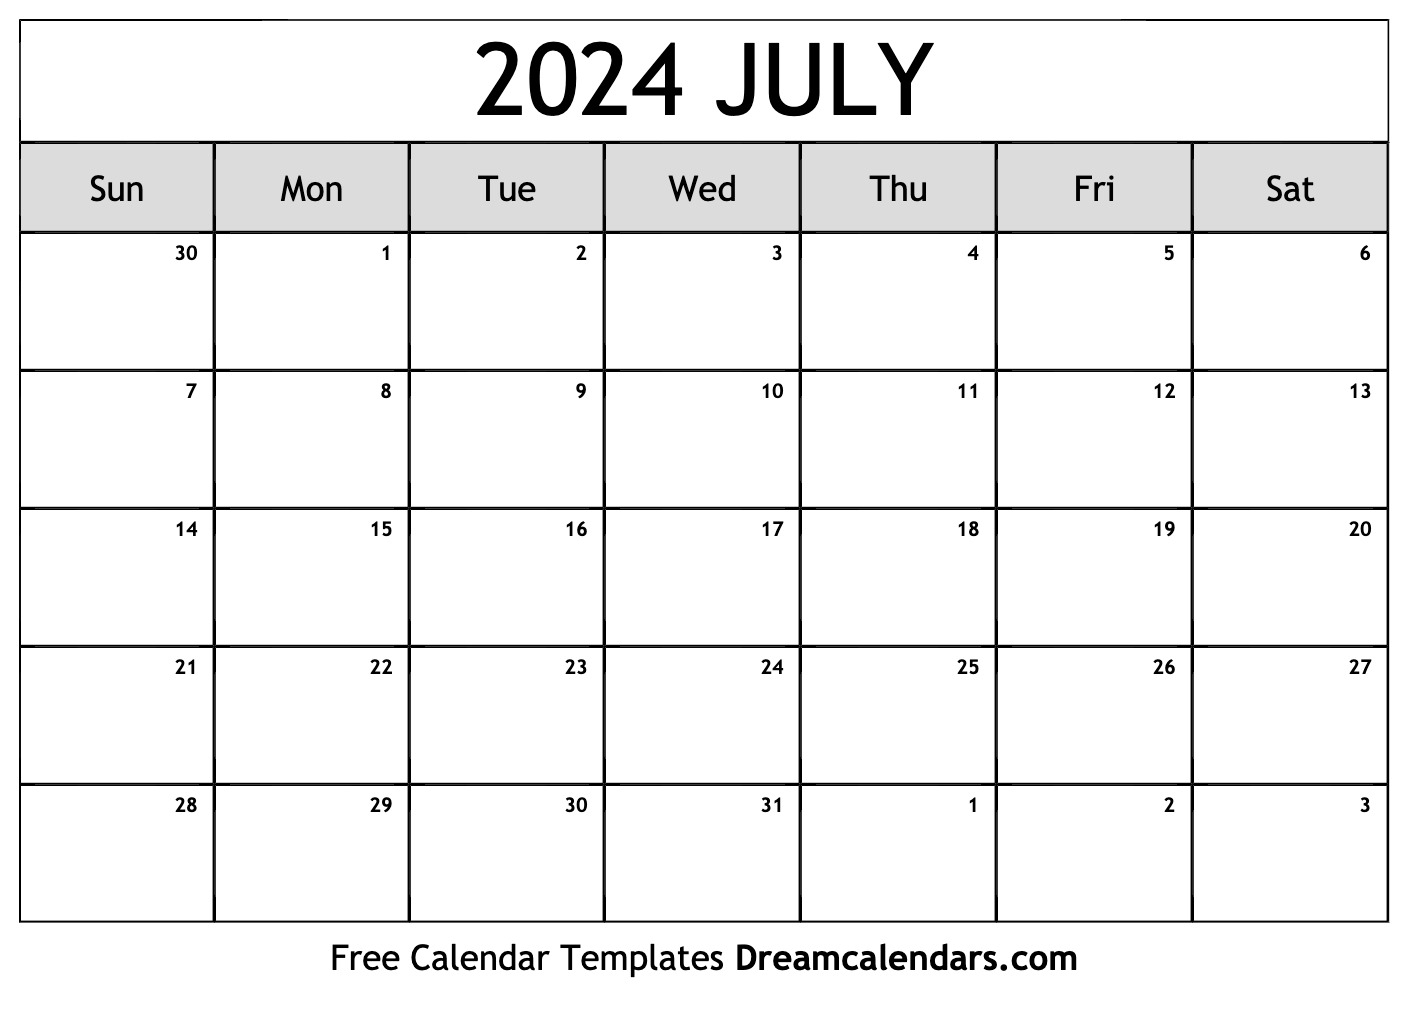 July 2024 Calendar | Free Blank Printable With Holidays for Free July 2024 Calendar Printable